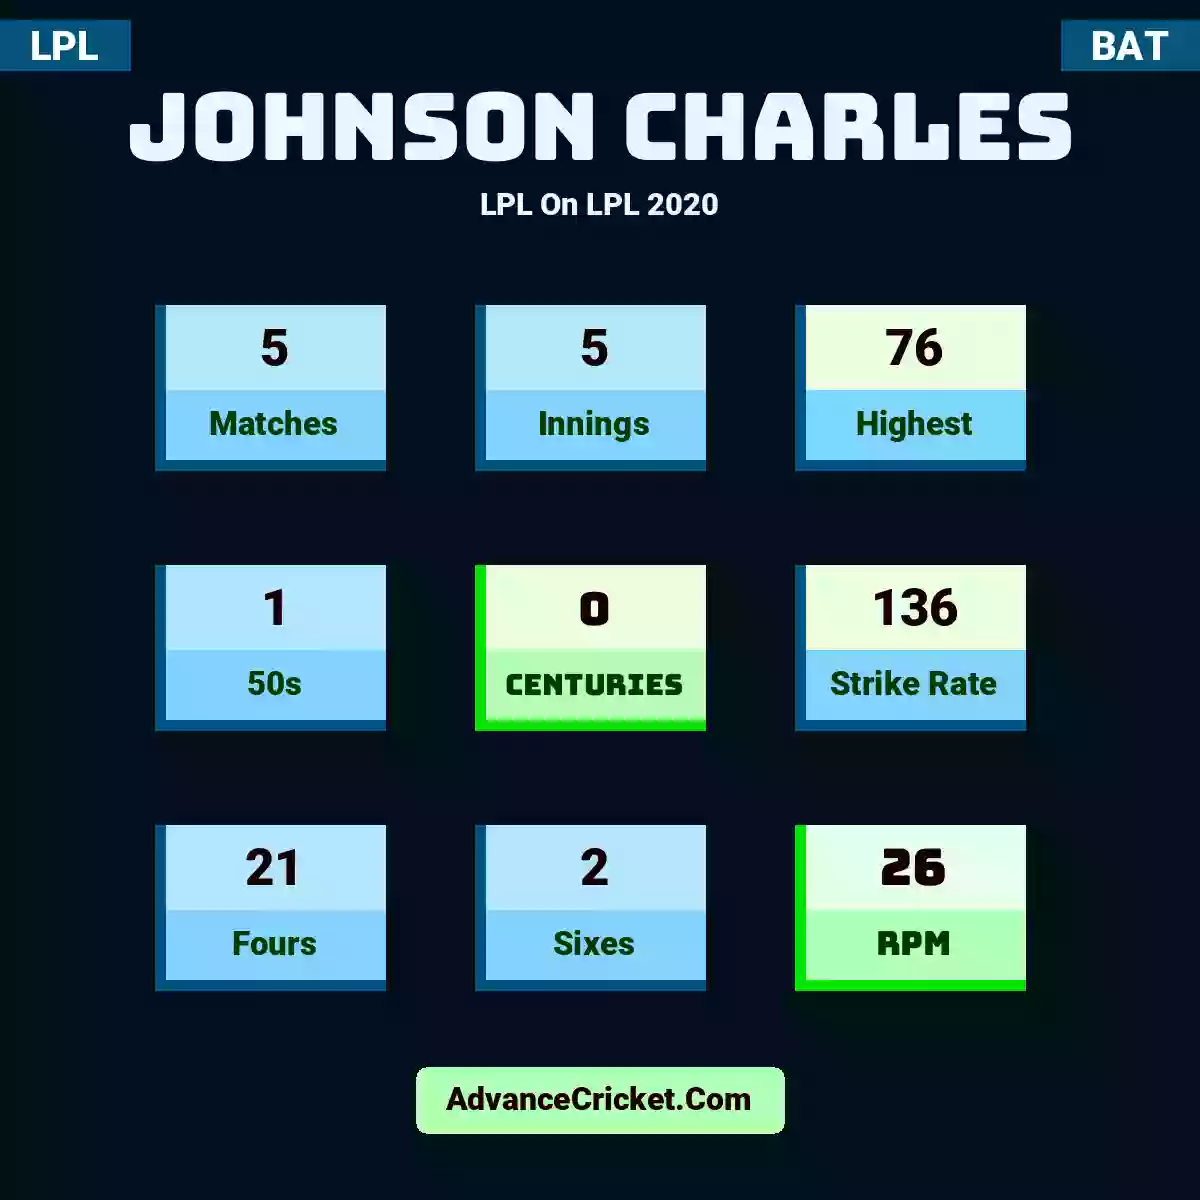 Johnson Charles LPL  On LPL 2020, Johnson Charles played 5 matches, scored 76 runs as highest, 1 half-centuries, and 0 centuries, with a strike rate of 136. J.Charles hit 21 fours and 2 sixes, with an RPM of 26.